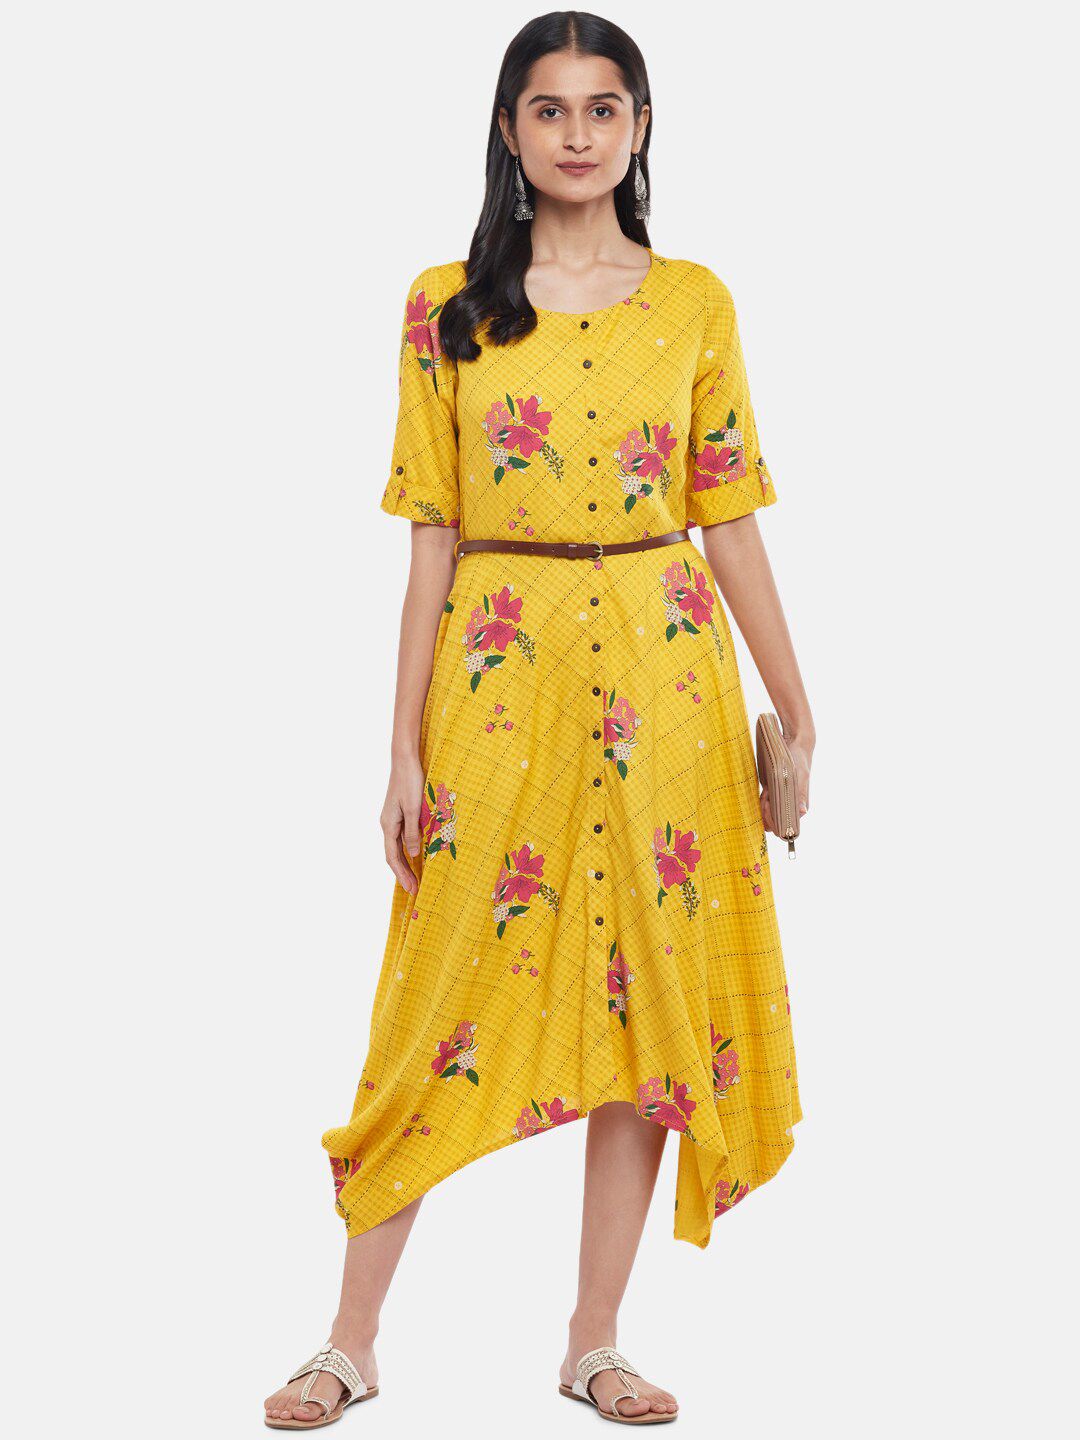 AKKRITI BY PANTALOONS Yellow & Red Floral Midi Dress Price in India